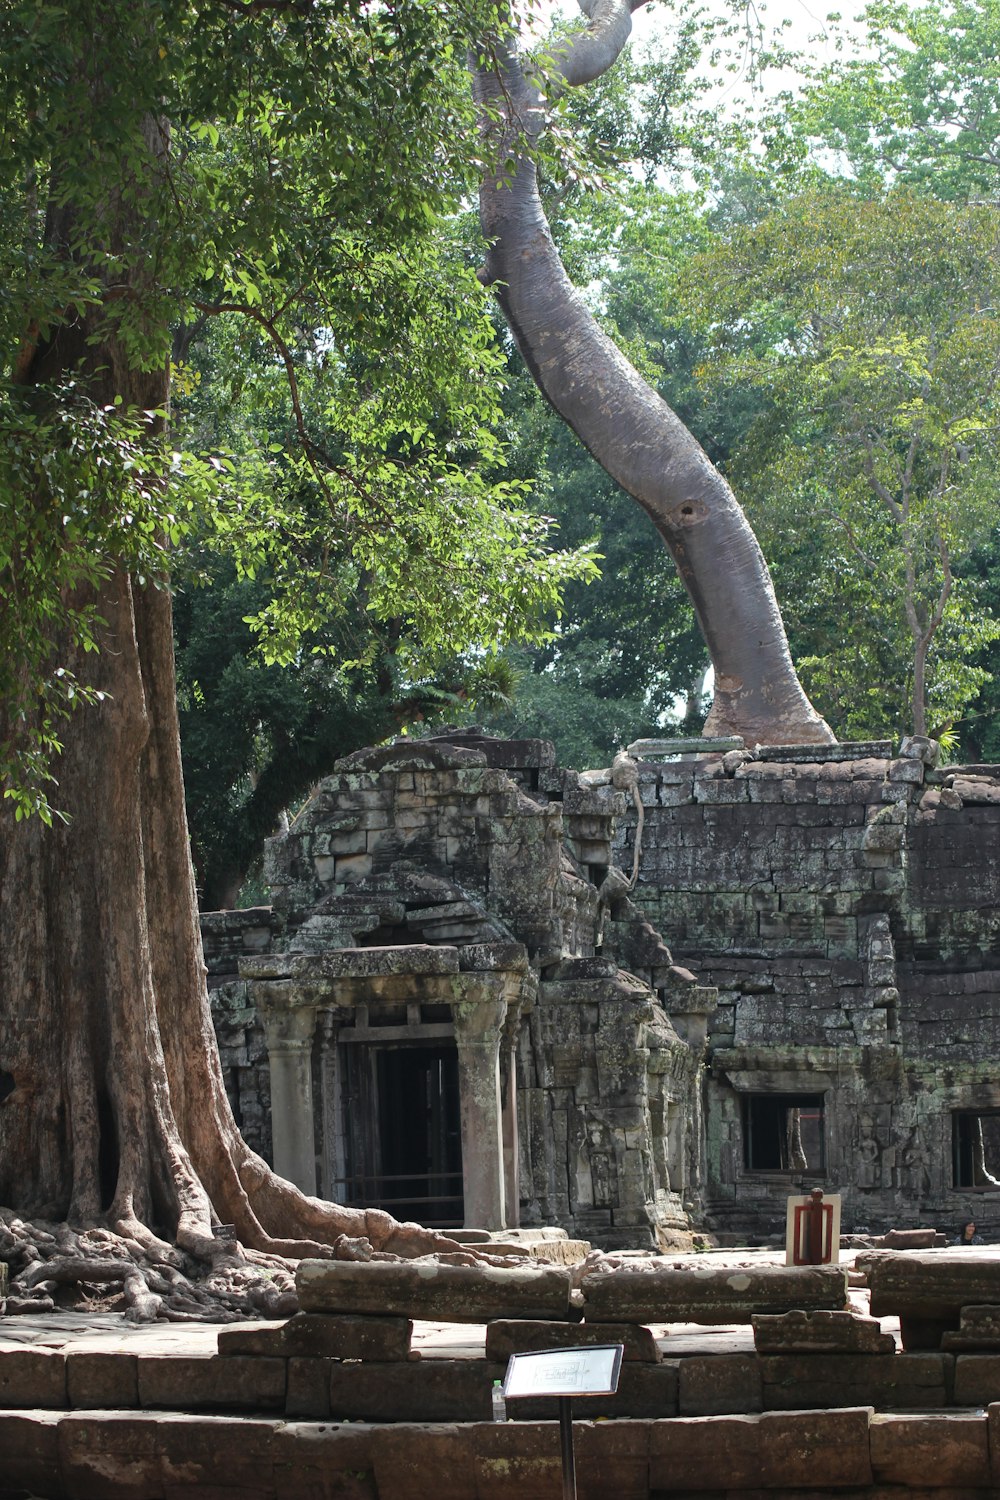 a tree growing over the ruins of a building